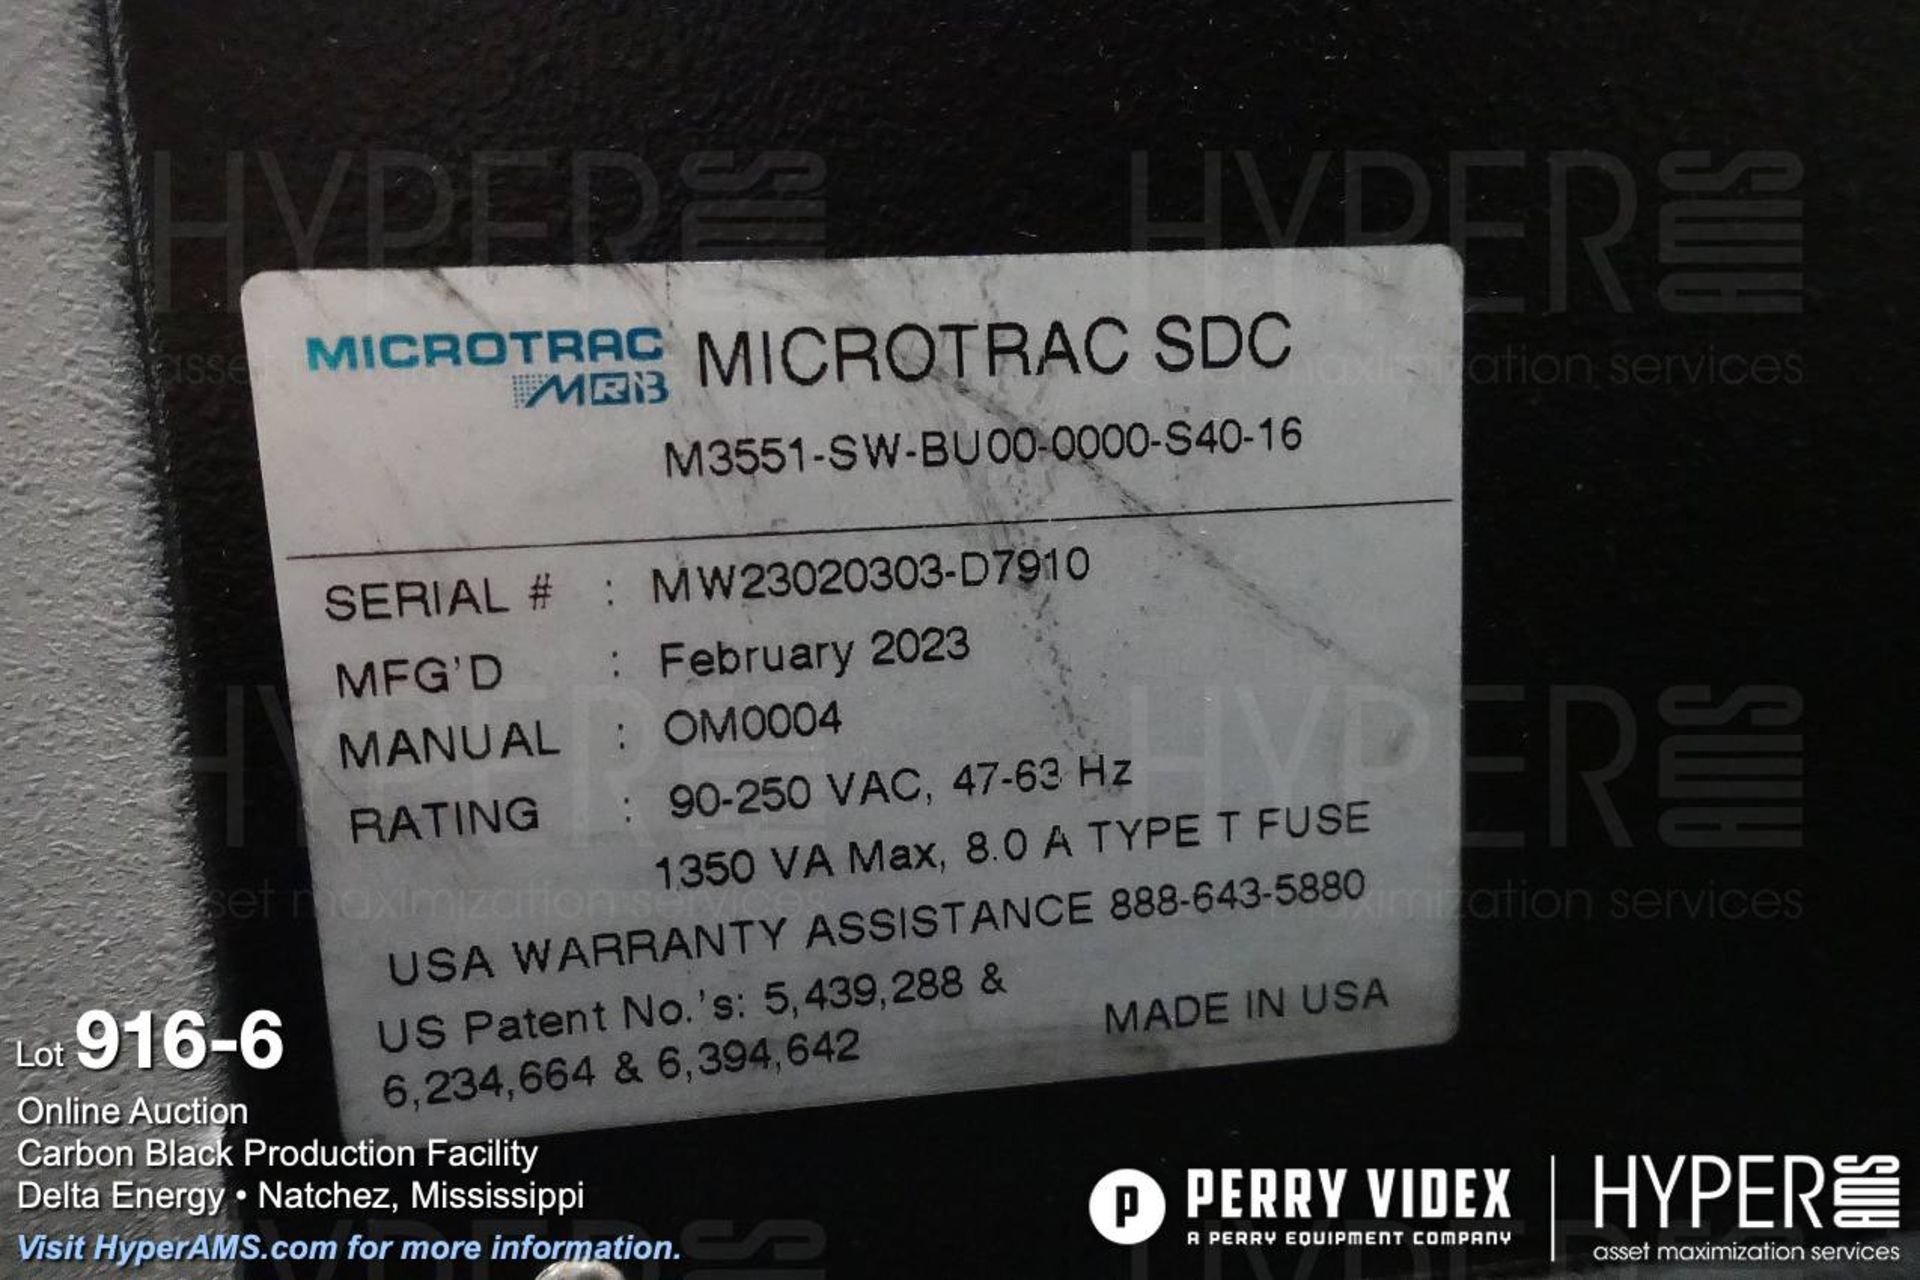 Microtrac MRB S3500 laser diffraction particle size analyzer (NEW IN 2023!) - Image 6 of 7